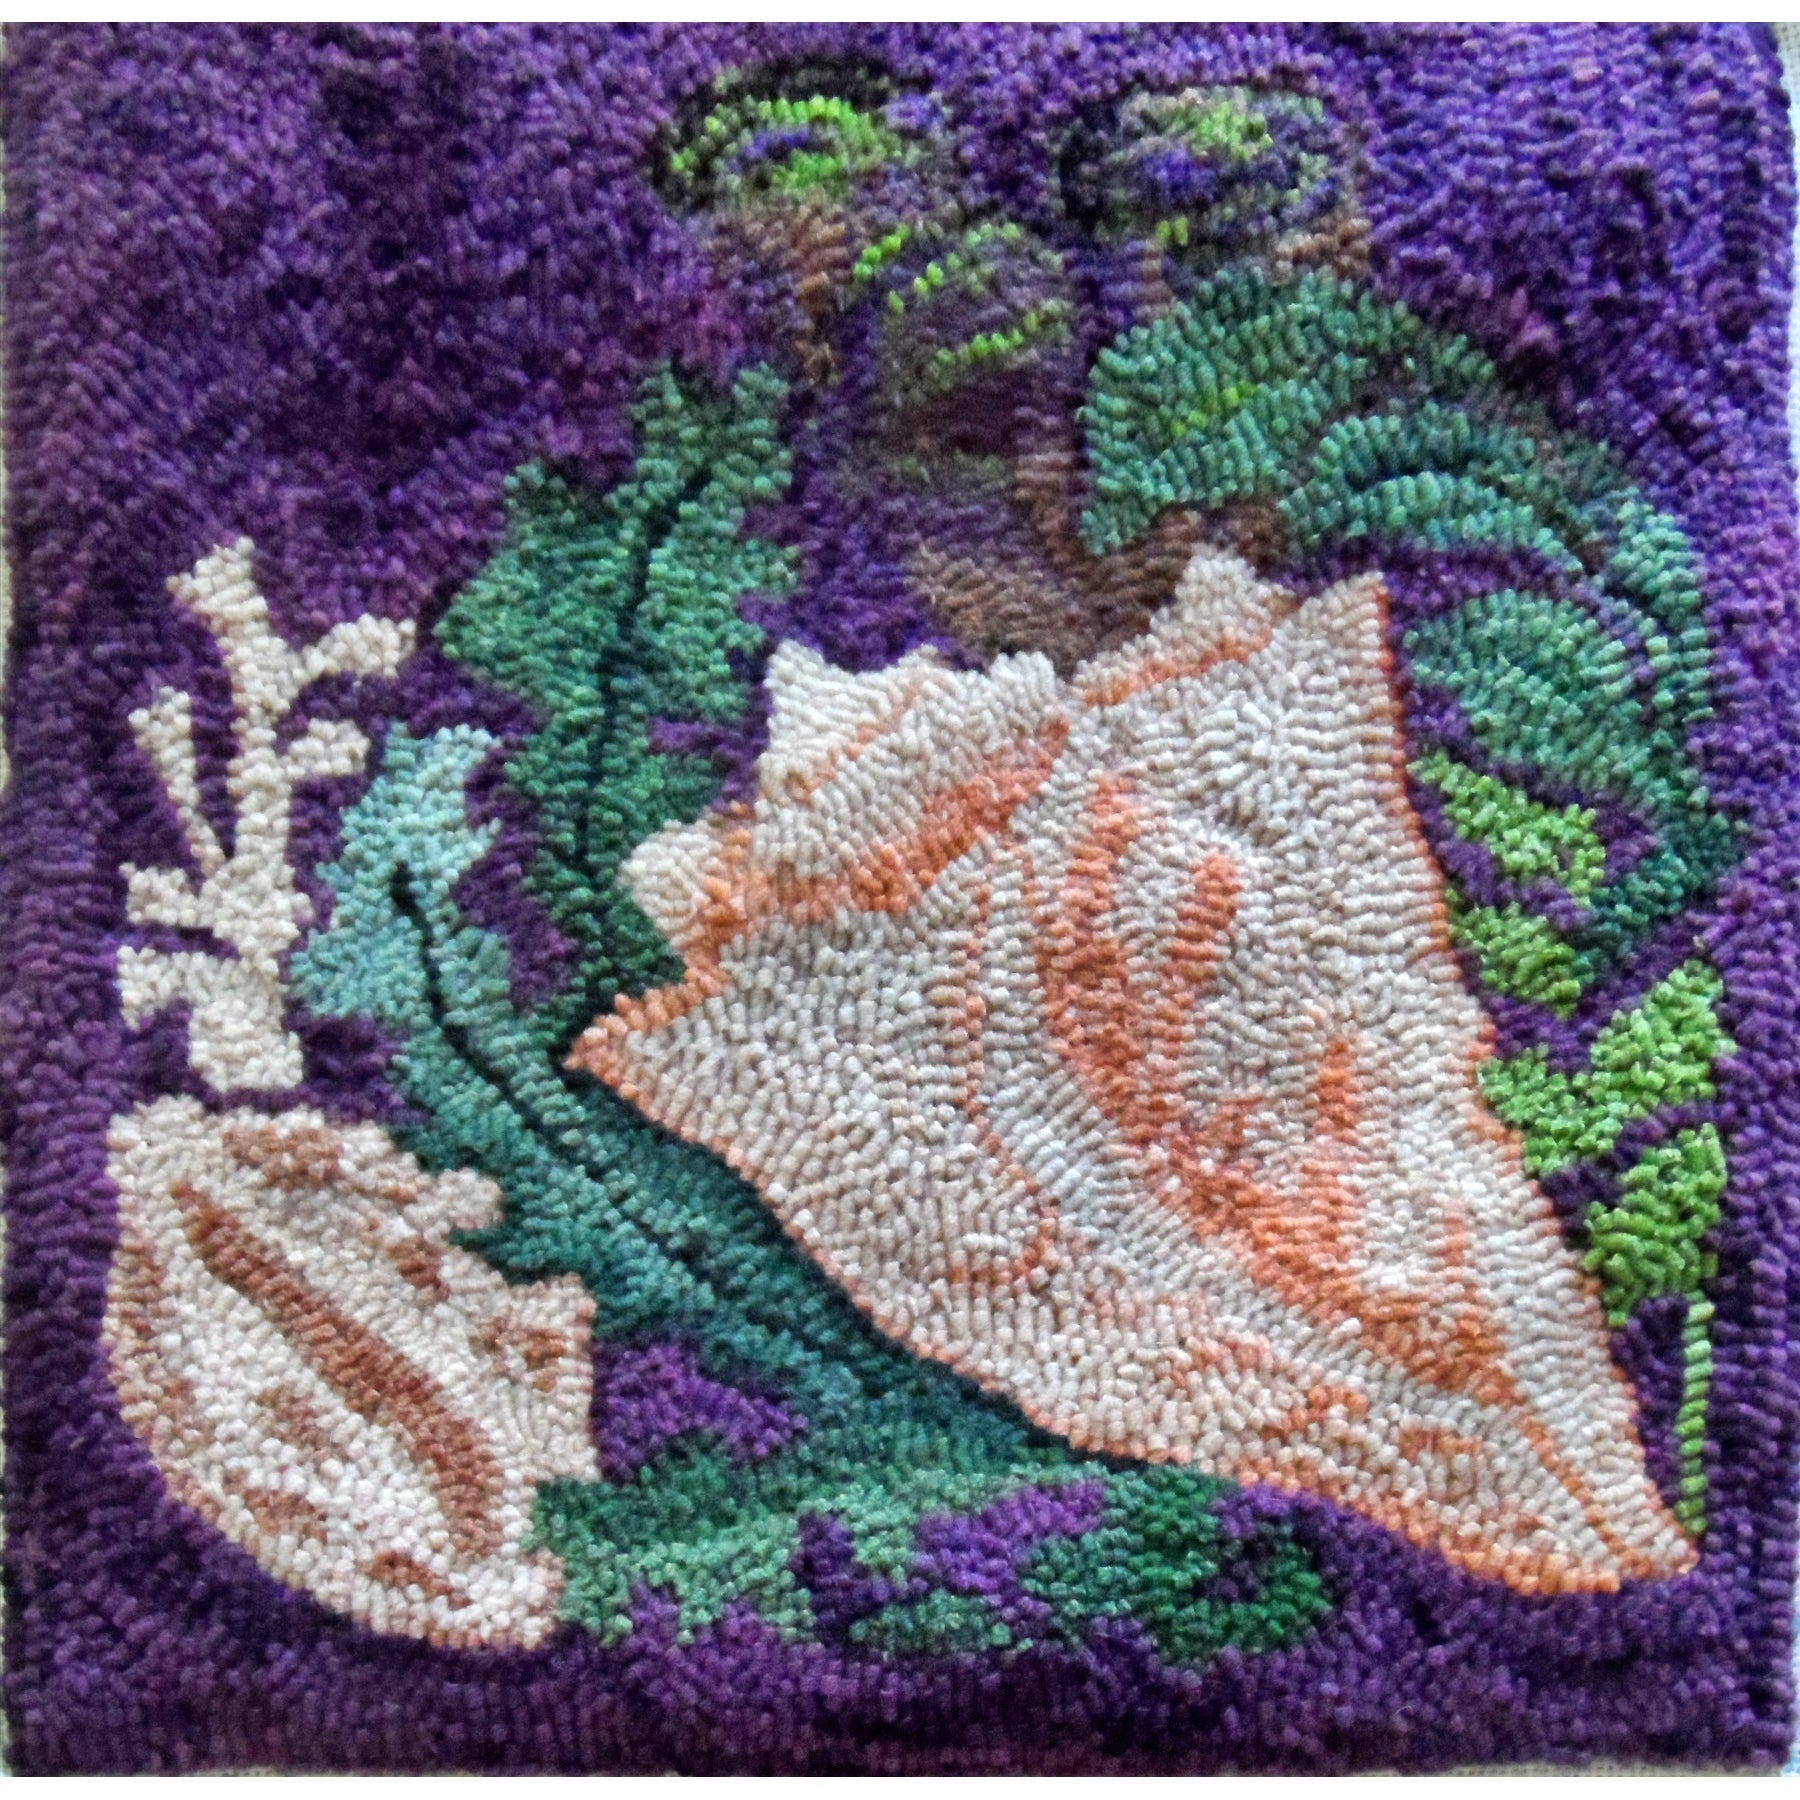 Sargasso, rug hooked by Janet Williams